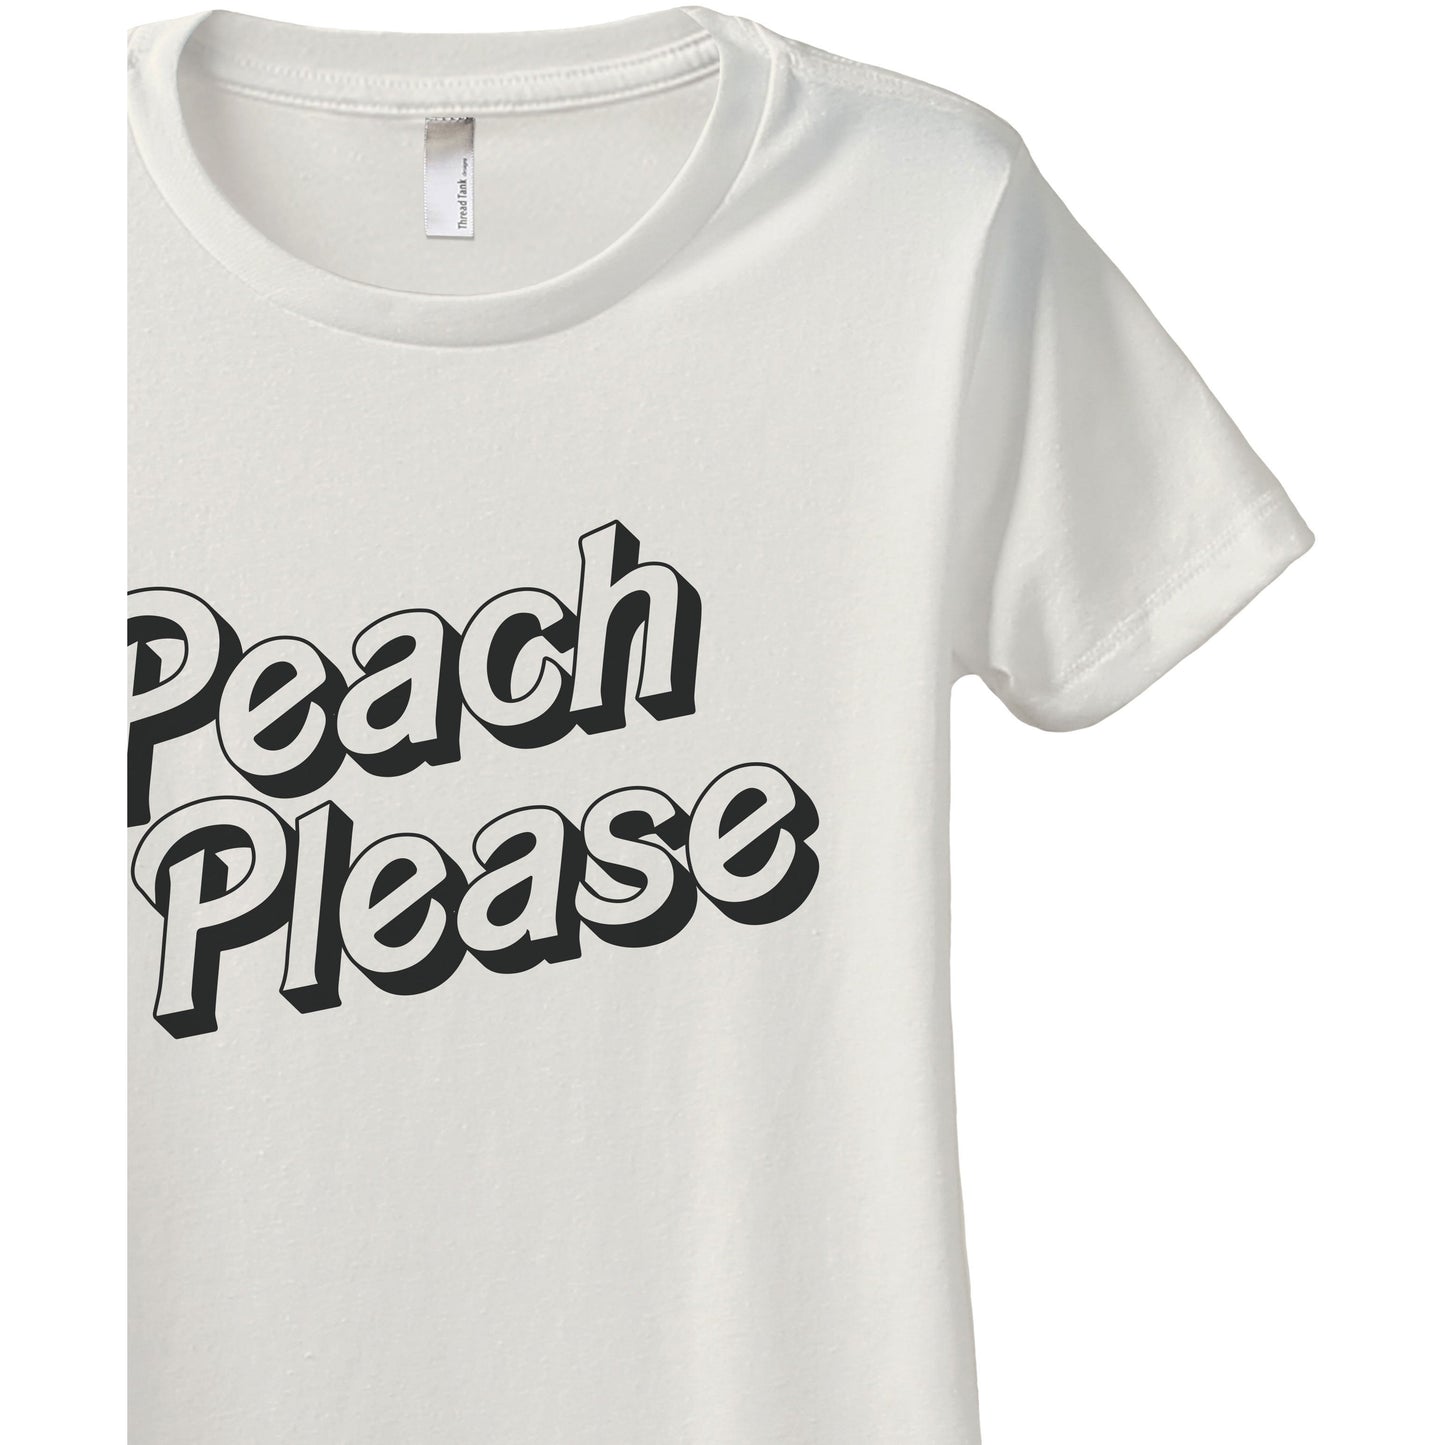 Peach Please - Stories You Can Wear by Thread Tank